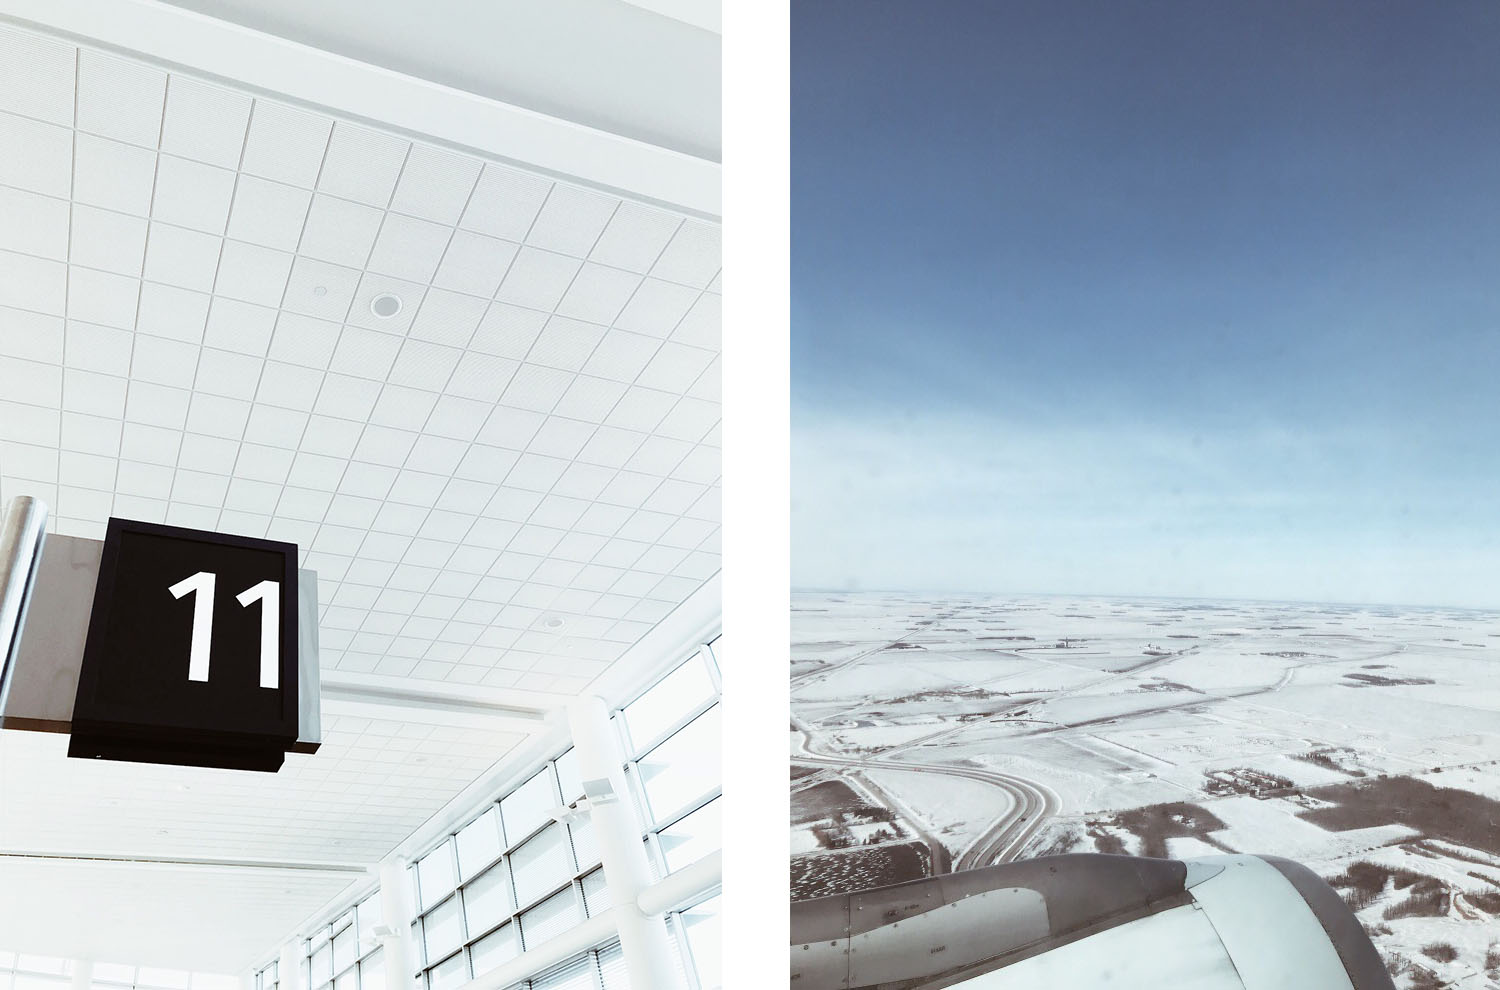 Snapshots of Winnipeg airport and from above it, taken by top travel blogger Cee Fardoe of Coco & Vera